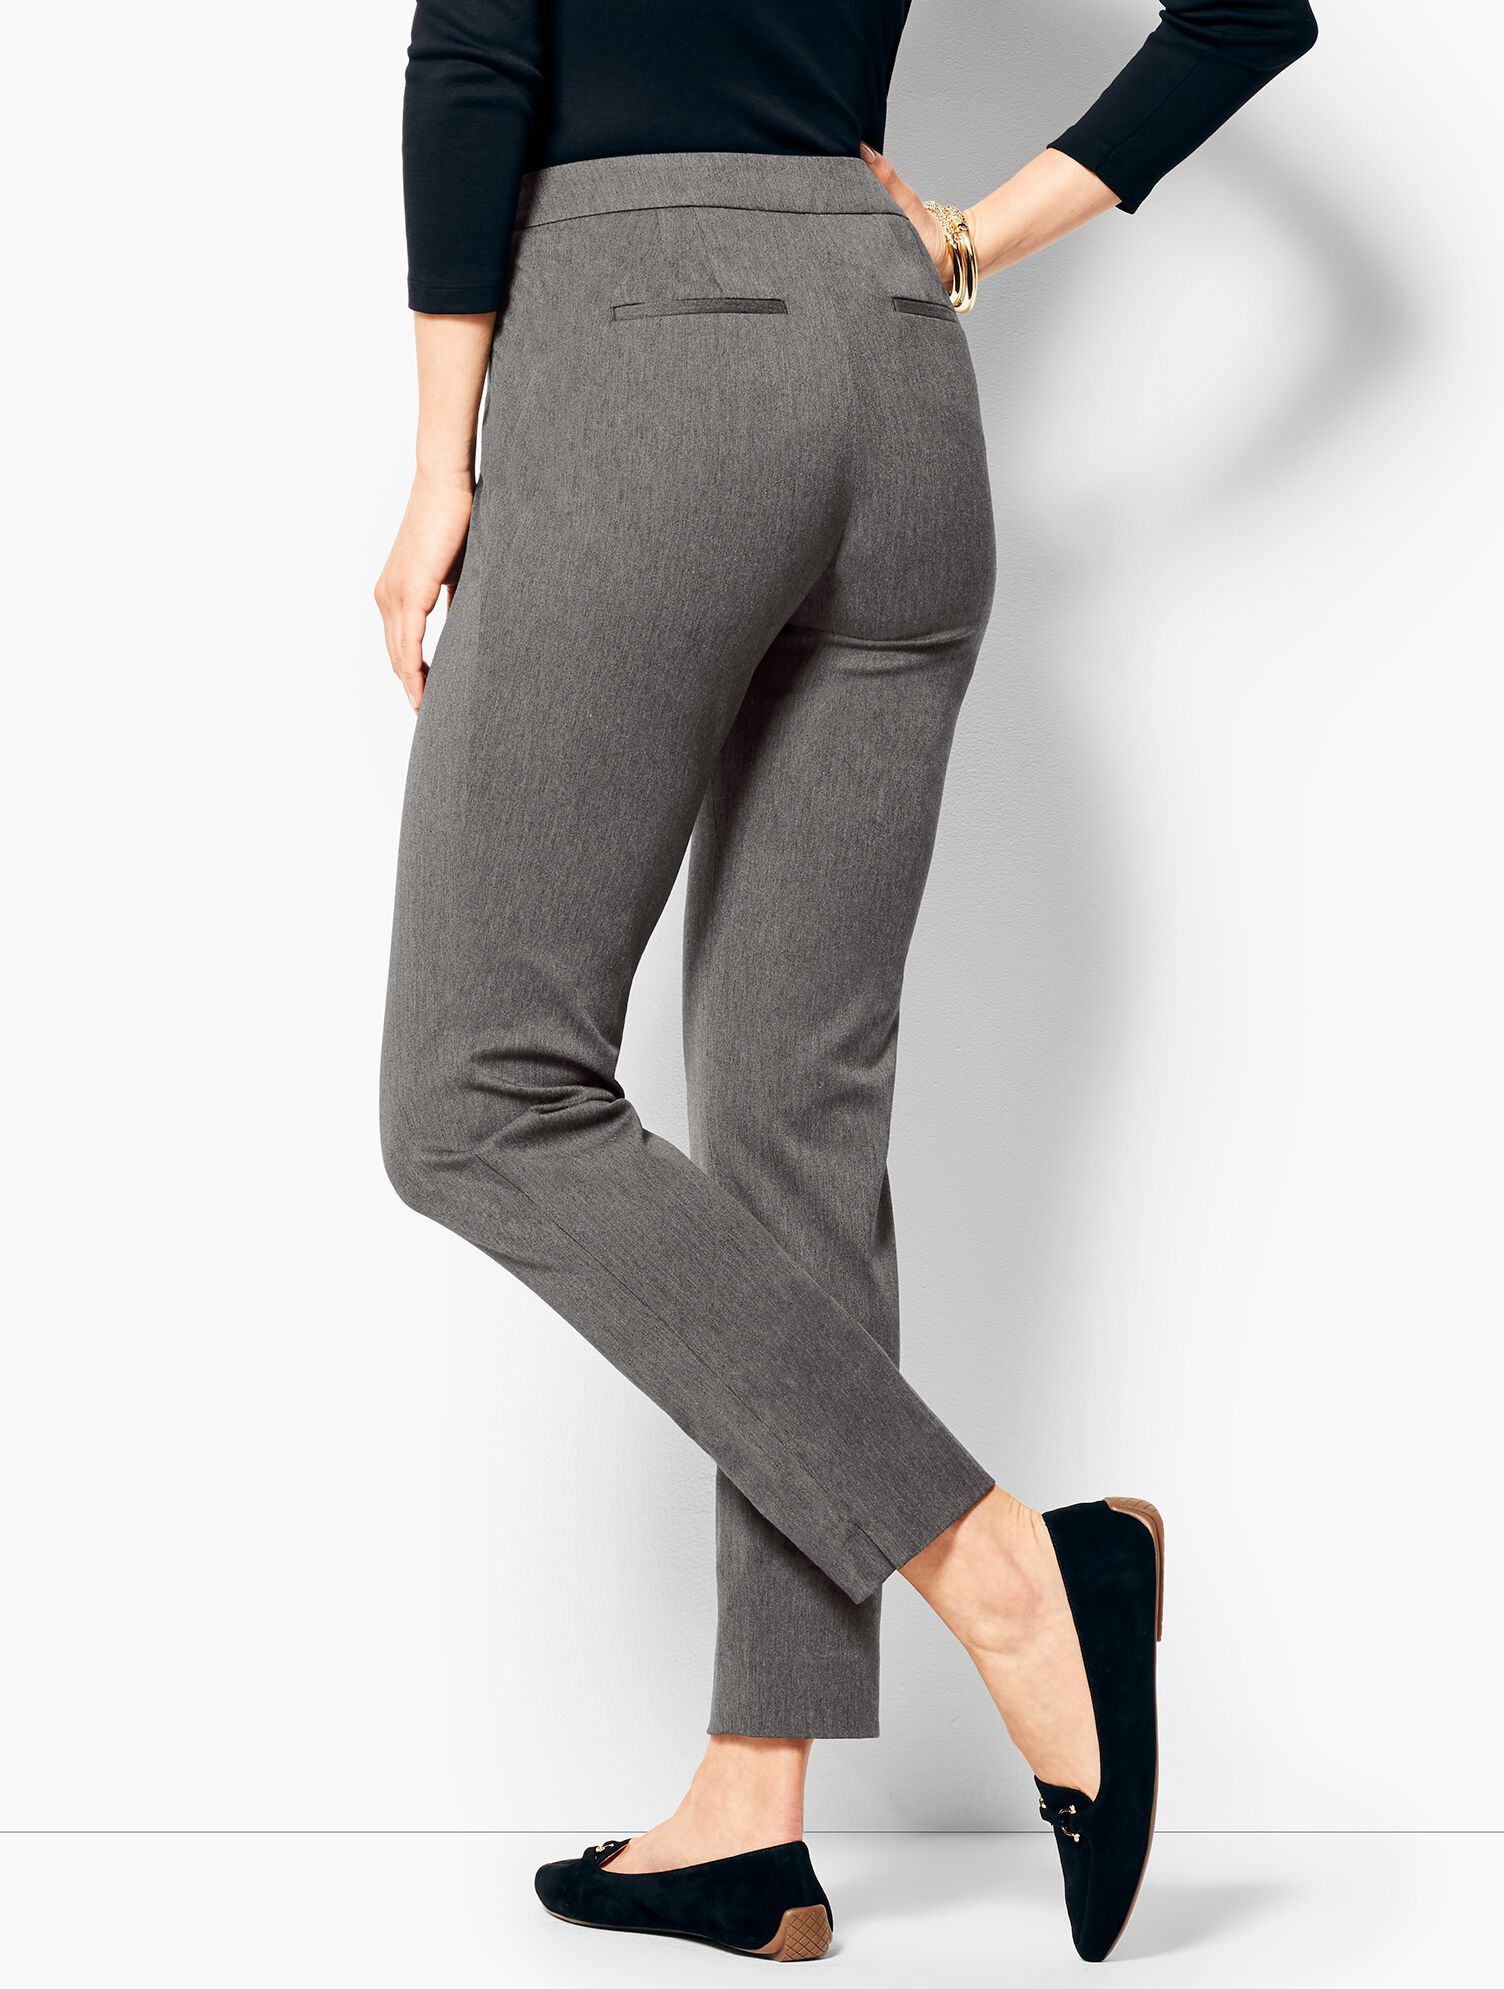 Talbots Chatham Ankle Pant - Charcoal Grey